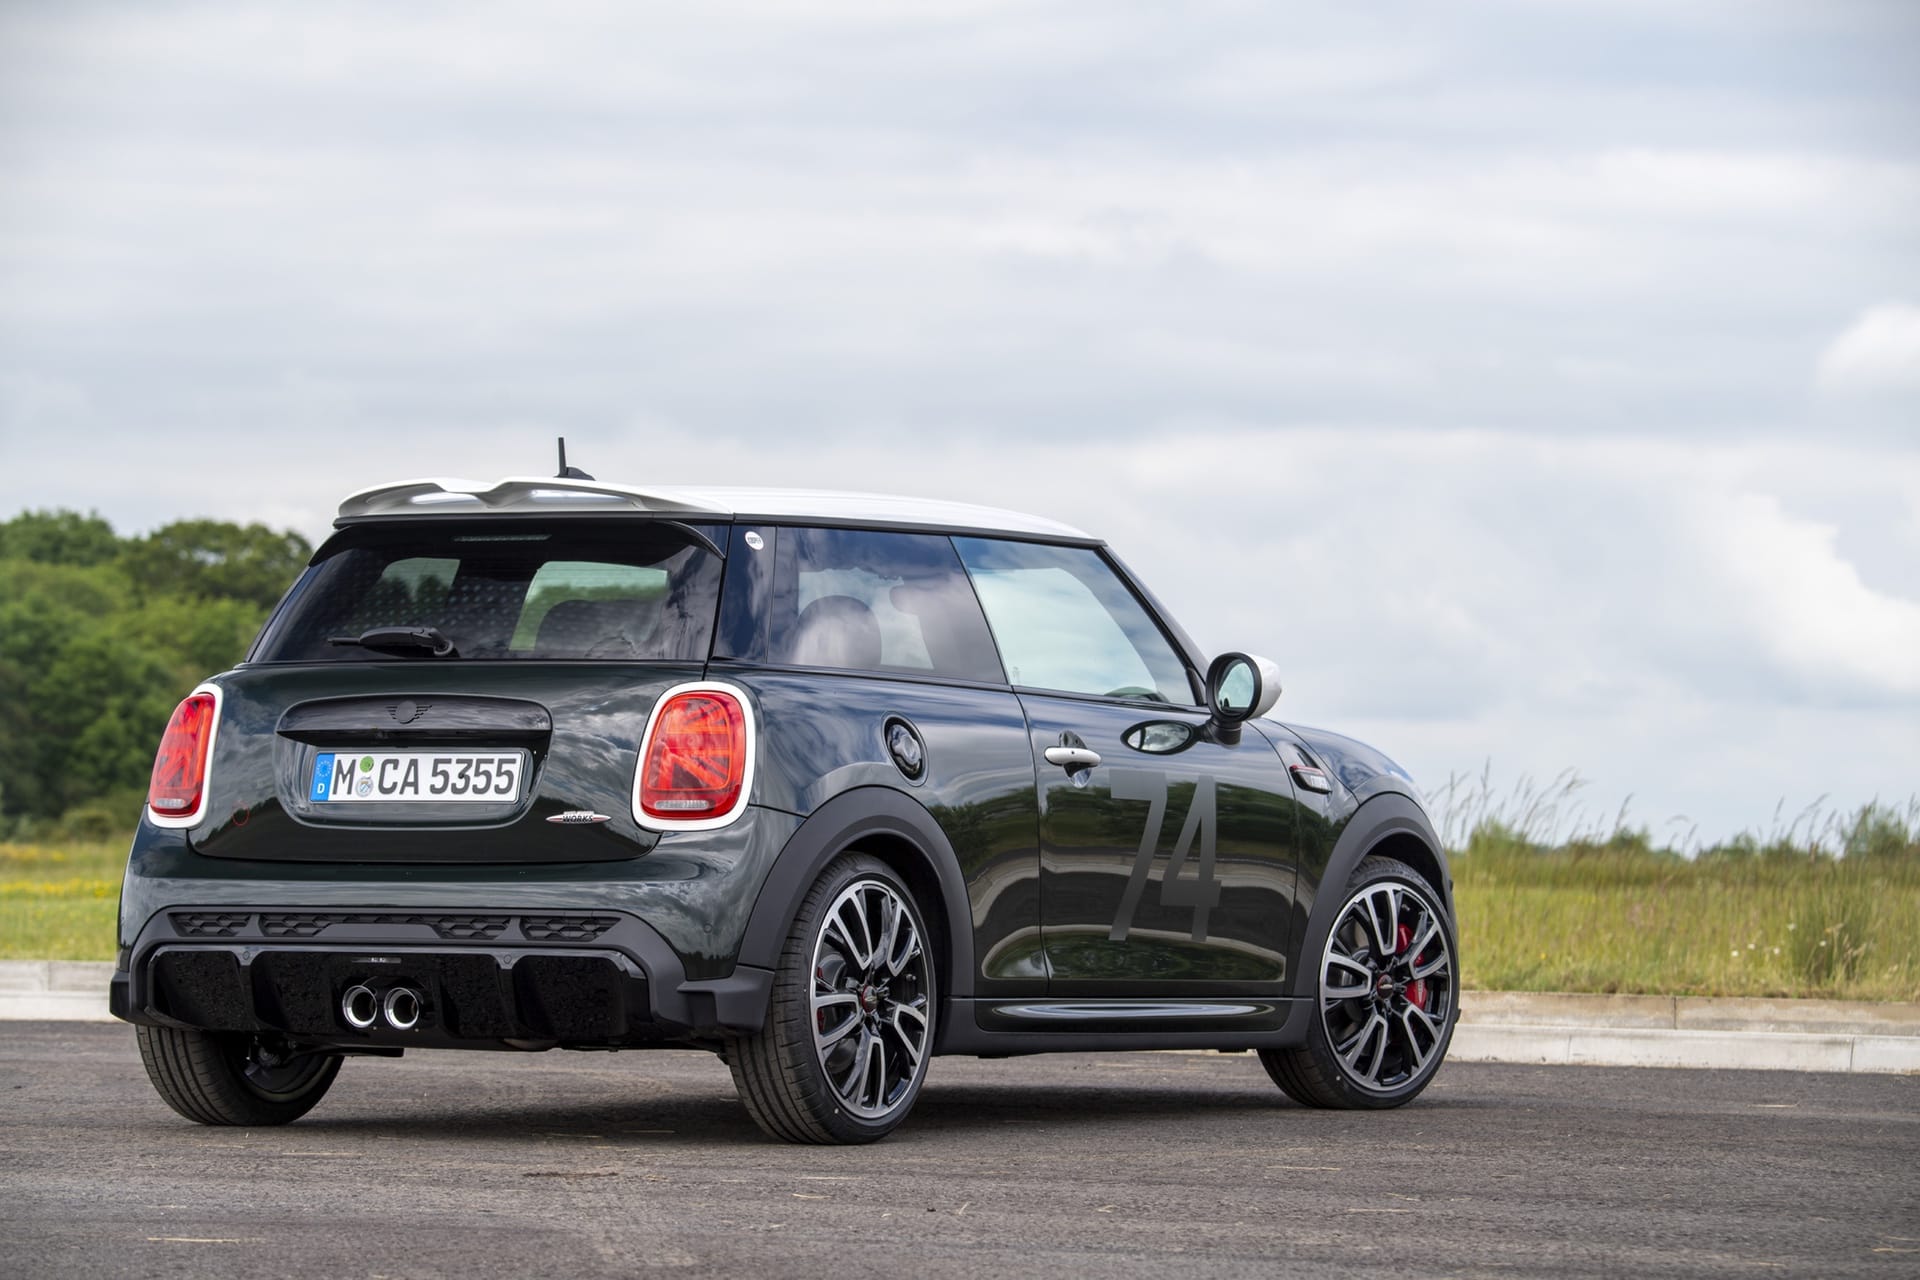 The Unexpected Underdog: JCW Edition celebrates 60 years of MINI